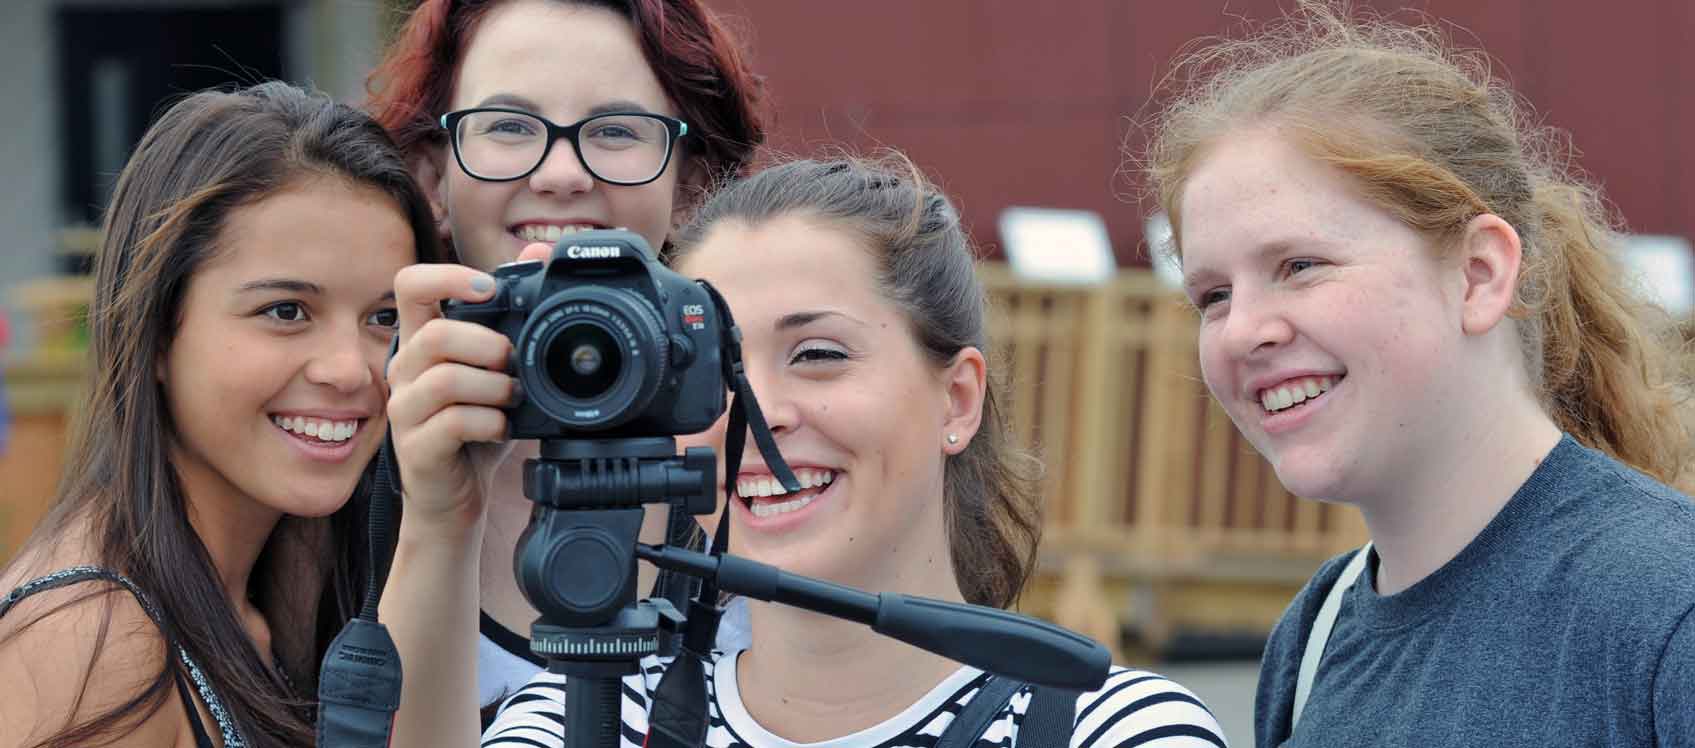 Photo of four young women, all U.S. Department of Energy Solar Decathlon 2015 competitors, smiling and looking at the display on the back of a camera mounted on a tripod.